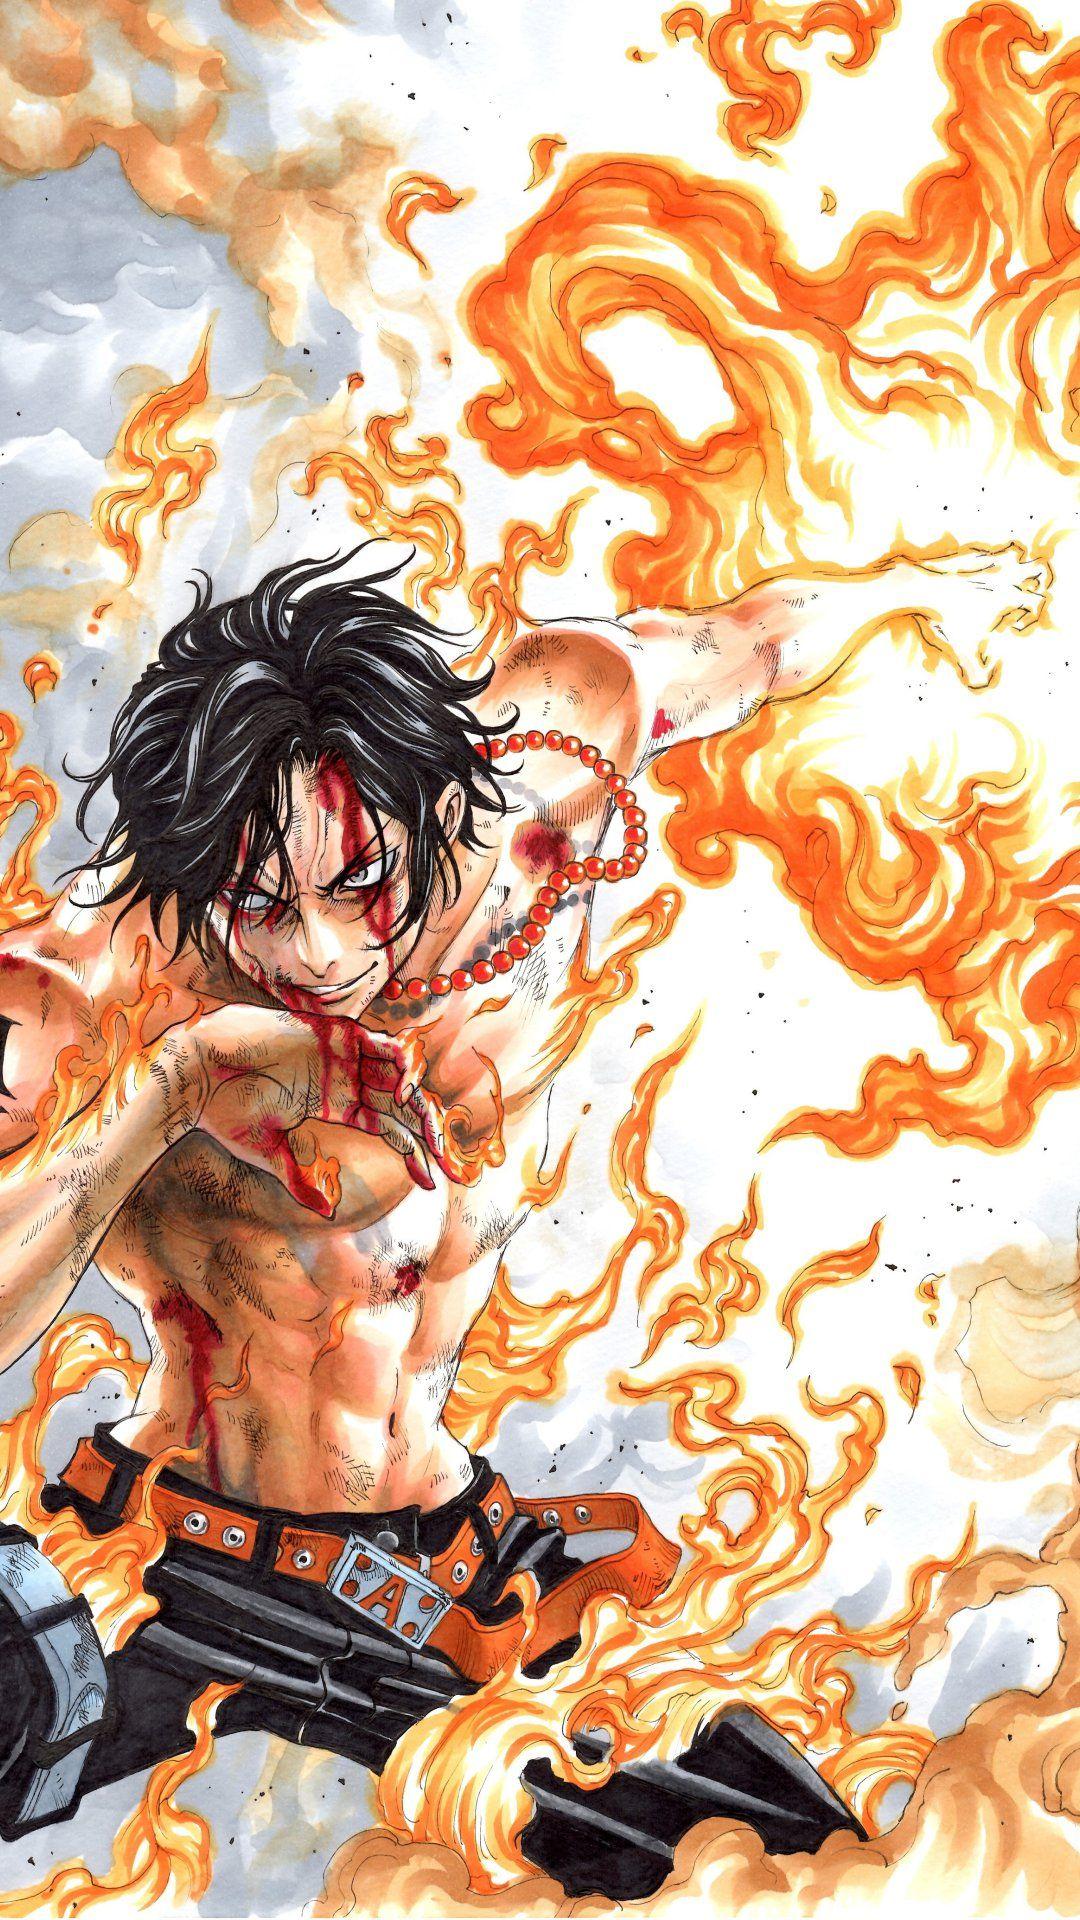 One piece wallpaper iphone ideas. Android wallpaper one